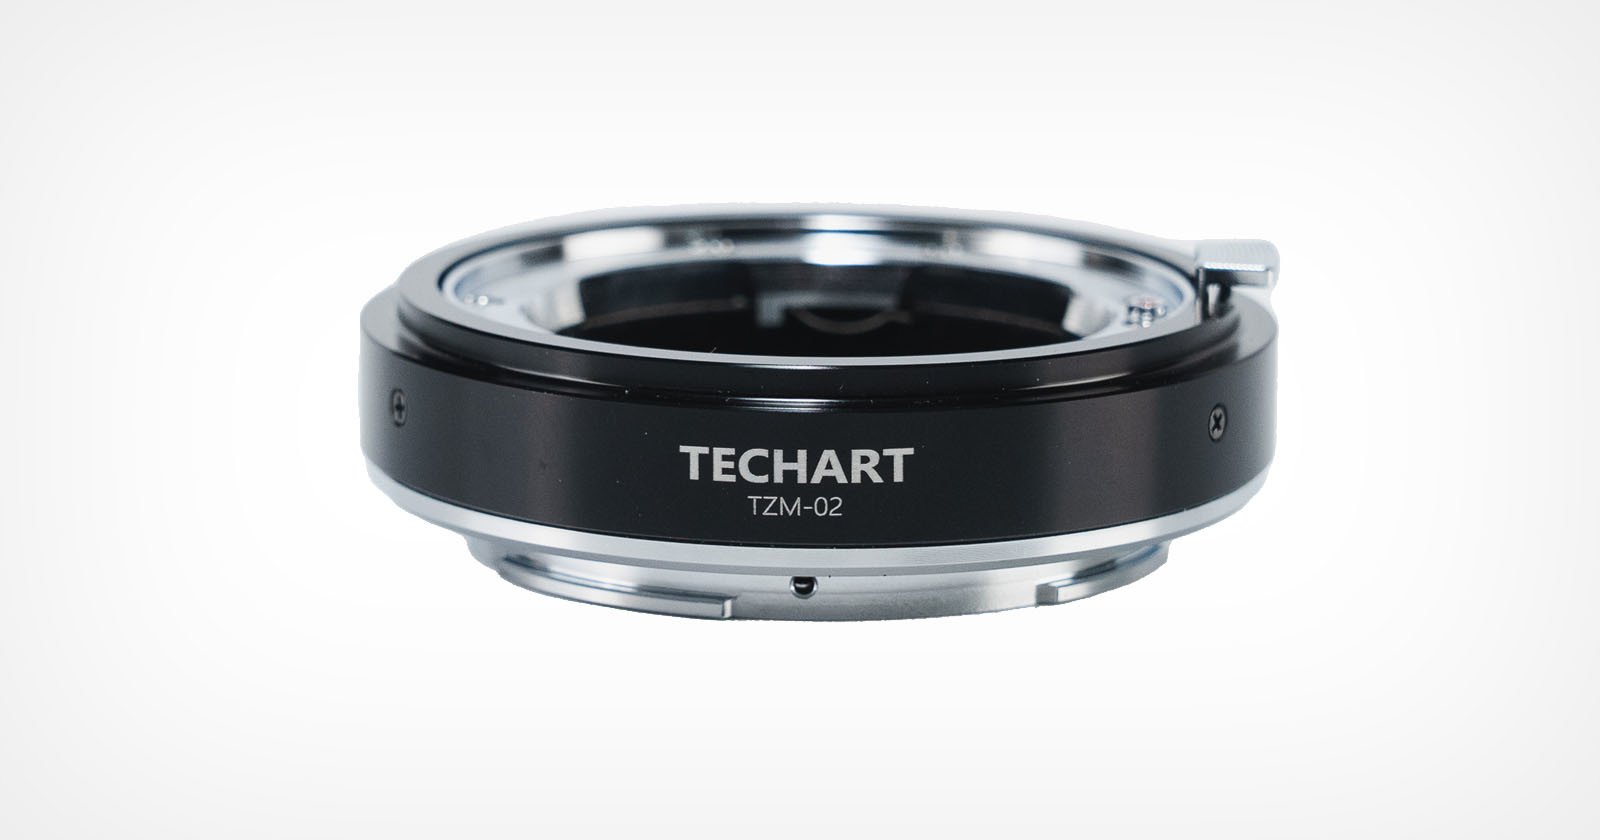 Techart’s New Leica M to Nikon Z Adapter Supports Autofocus in Video